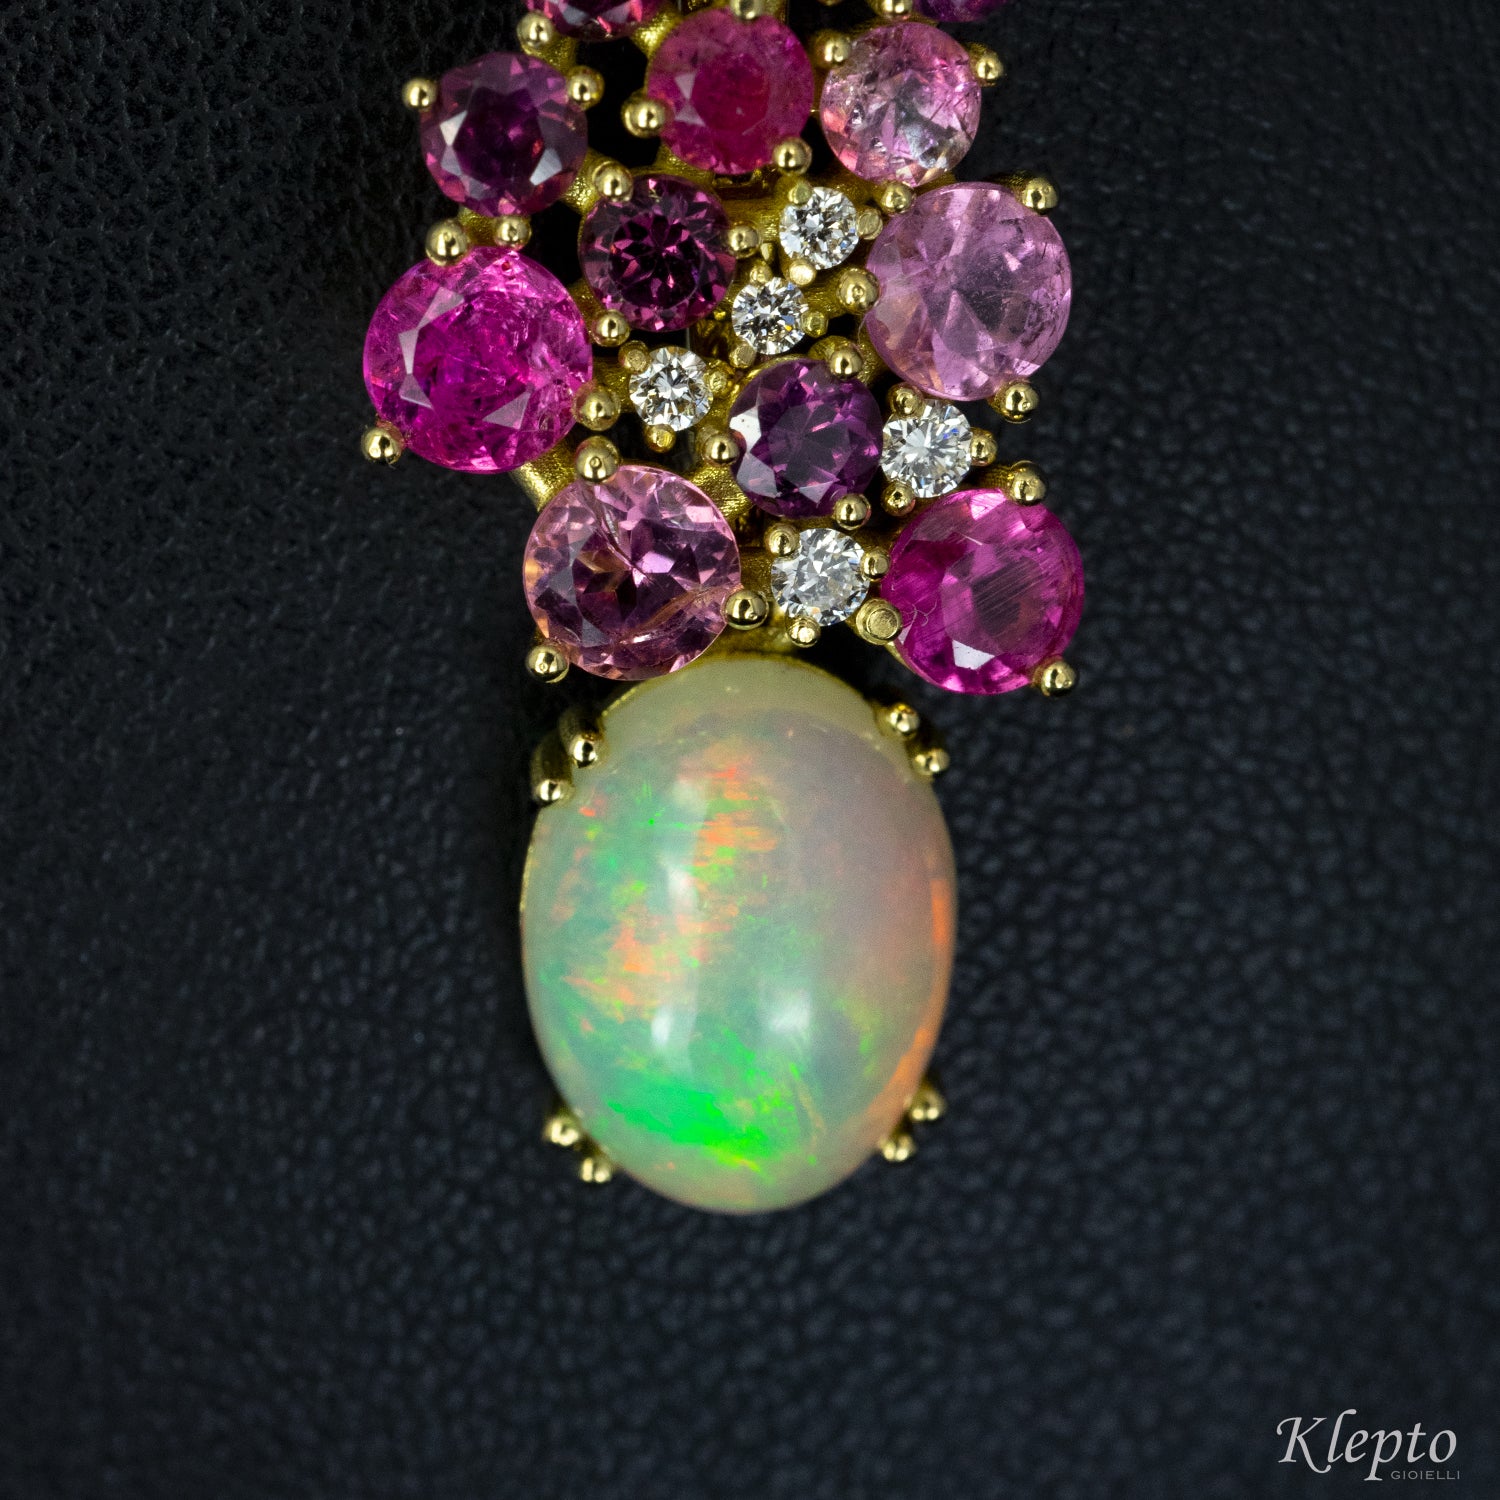 Yellow gold pendant with Tourmalines, Rhodolites, Opal and Diamonds.